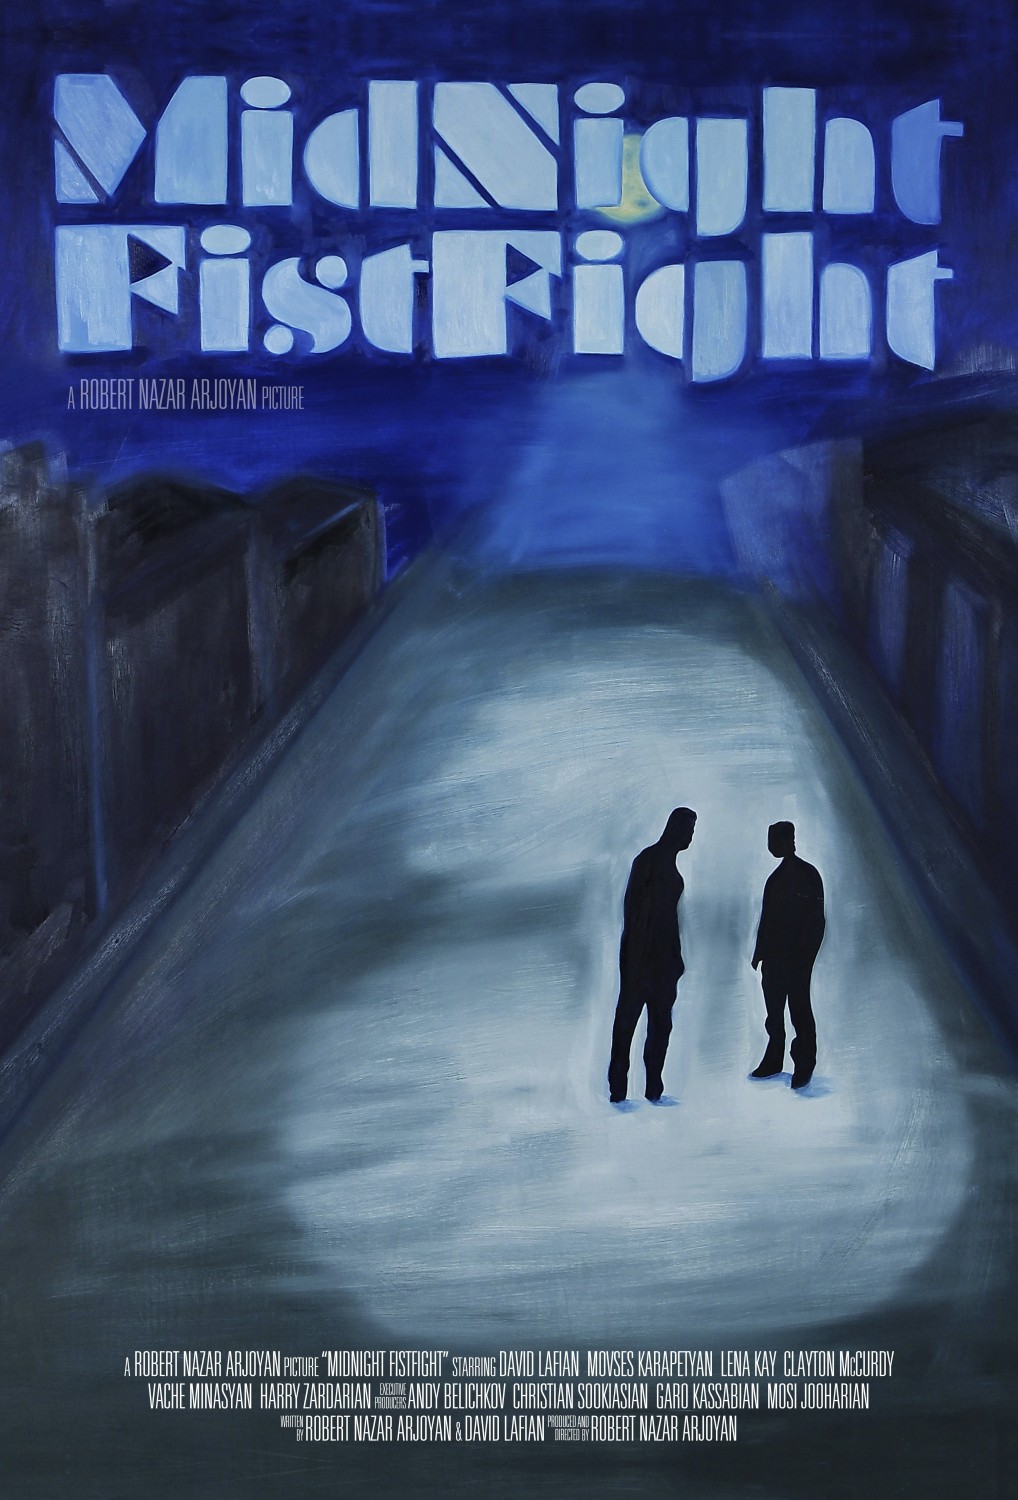 Extra Large Movie Poster Image for MidNight FistFight